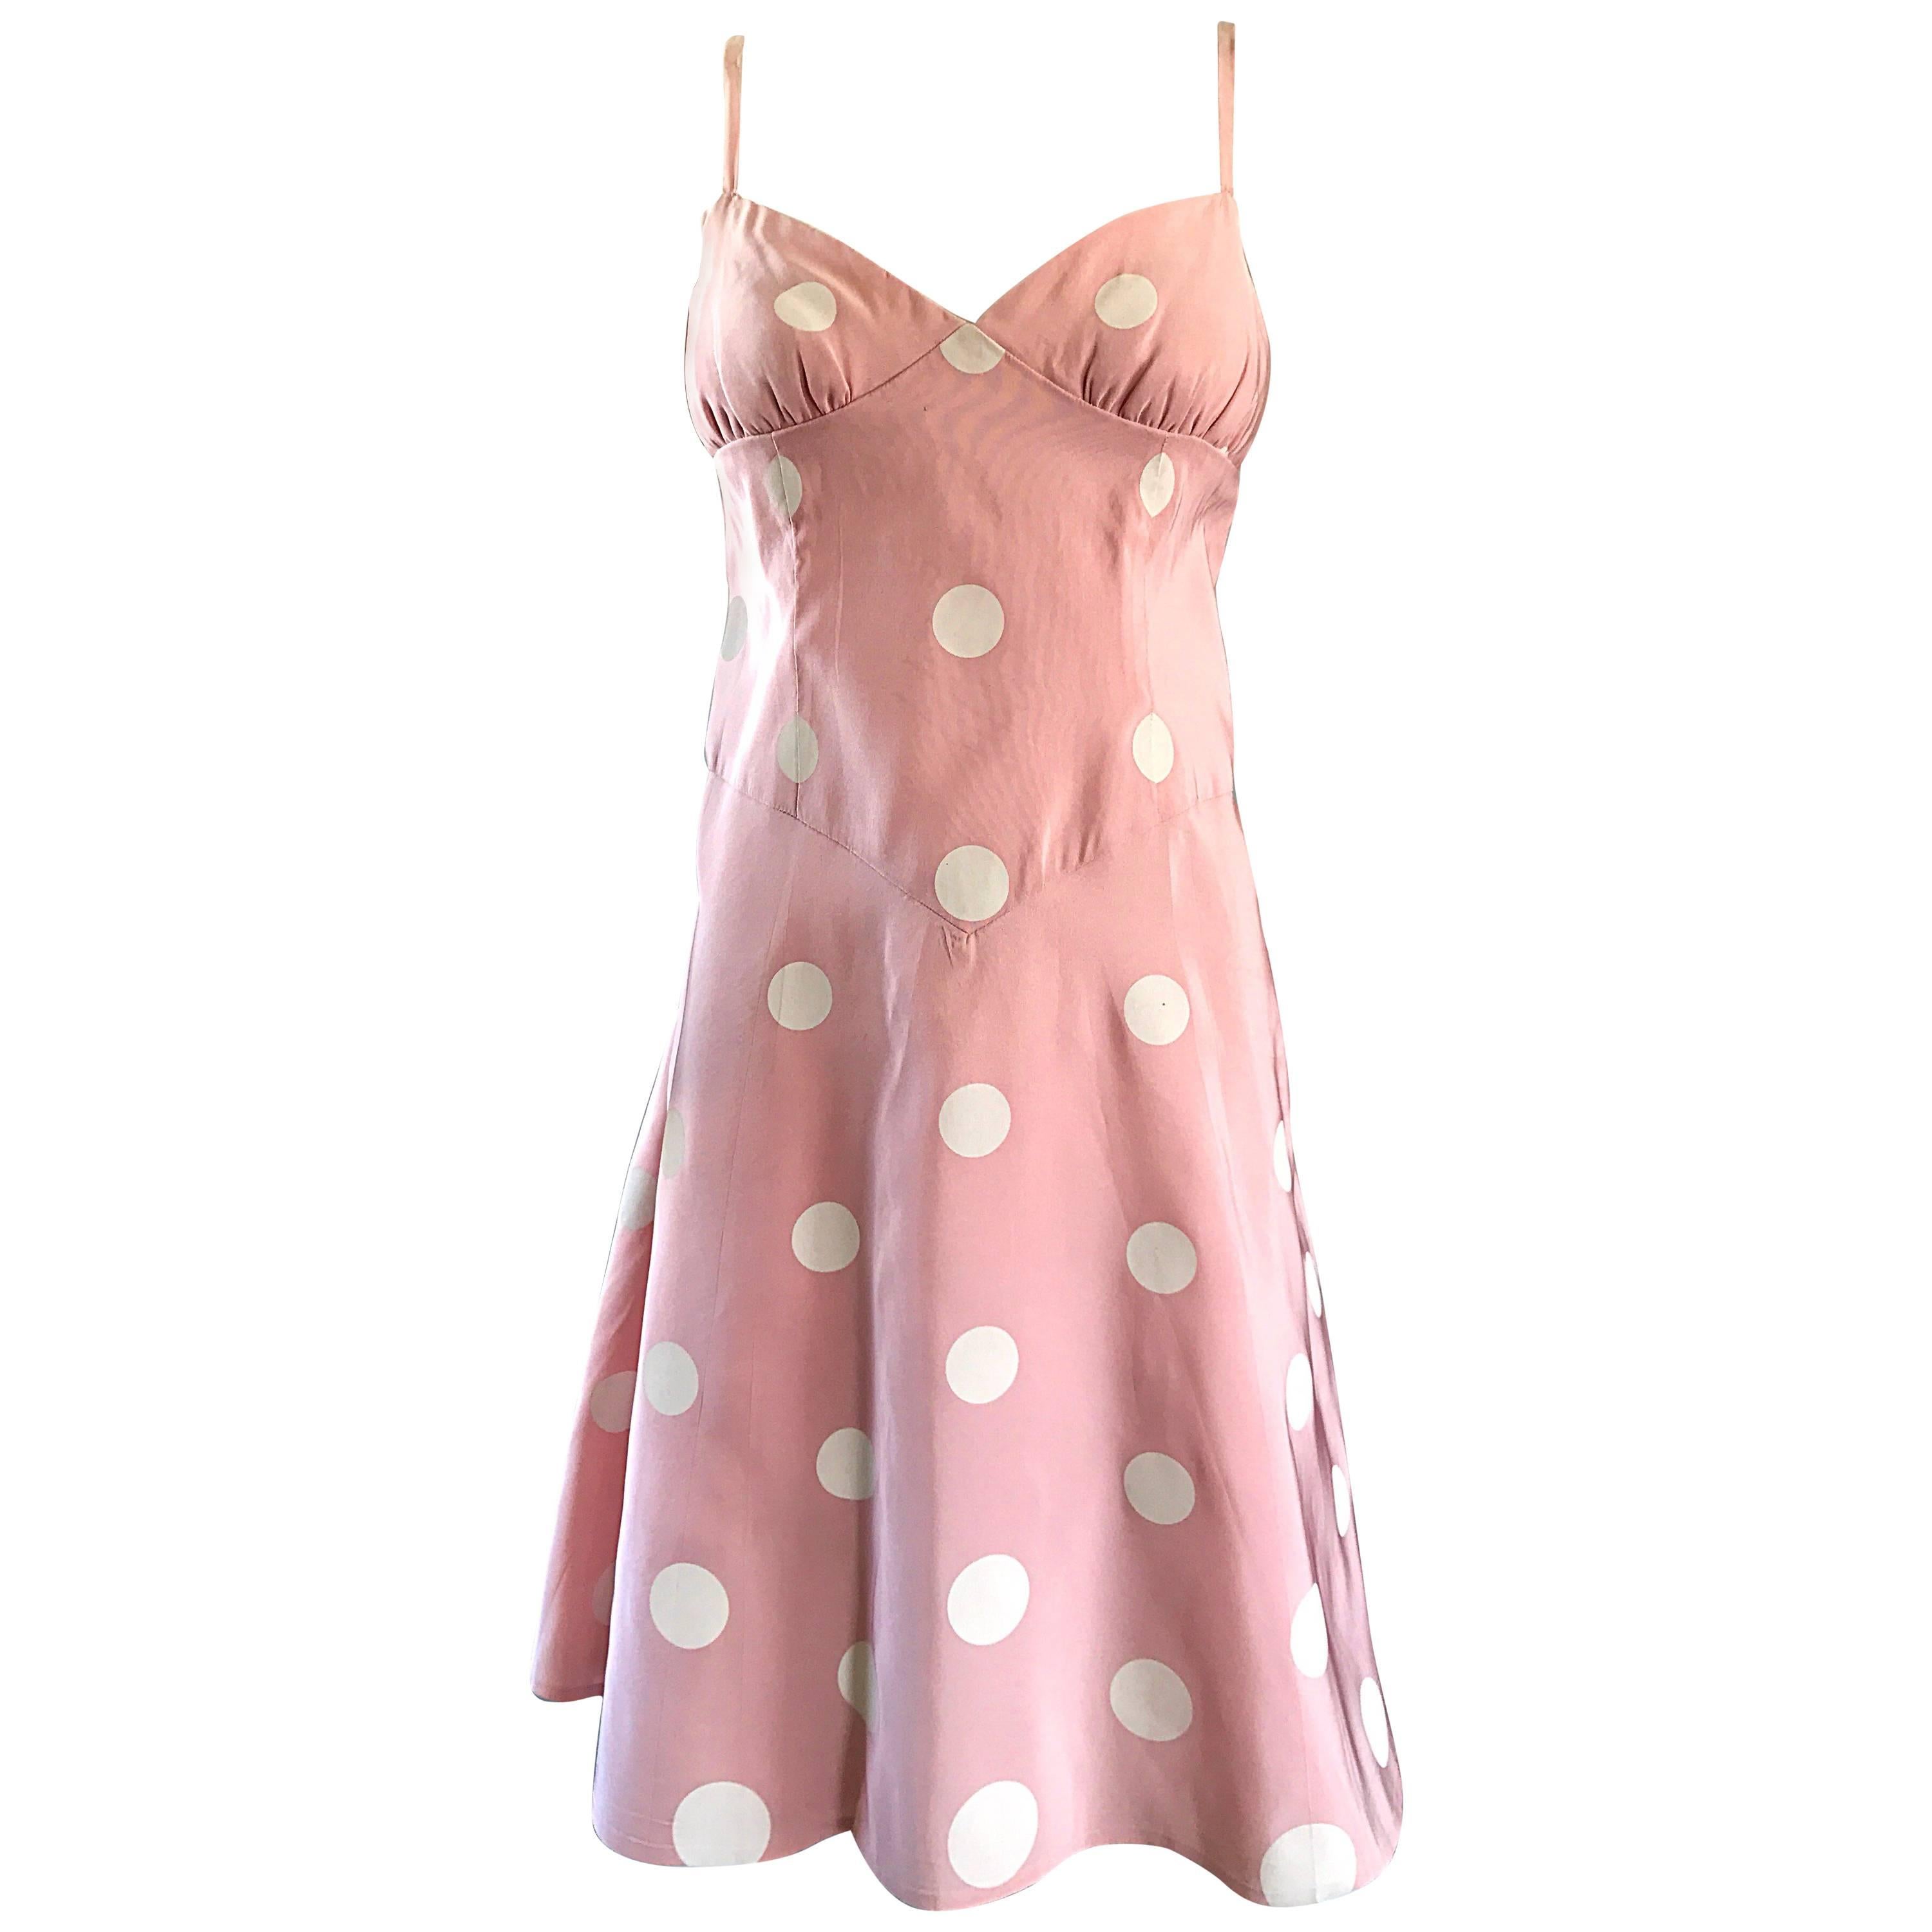 Bill Blass Pink White Polka Dot Hand Painted Fit and Flare Vintage Dress, 1990